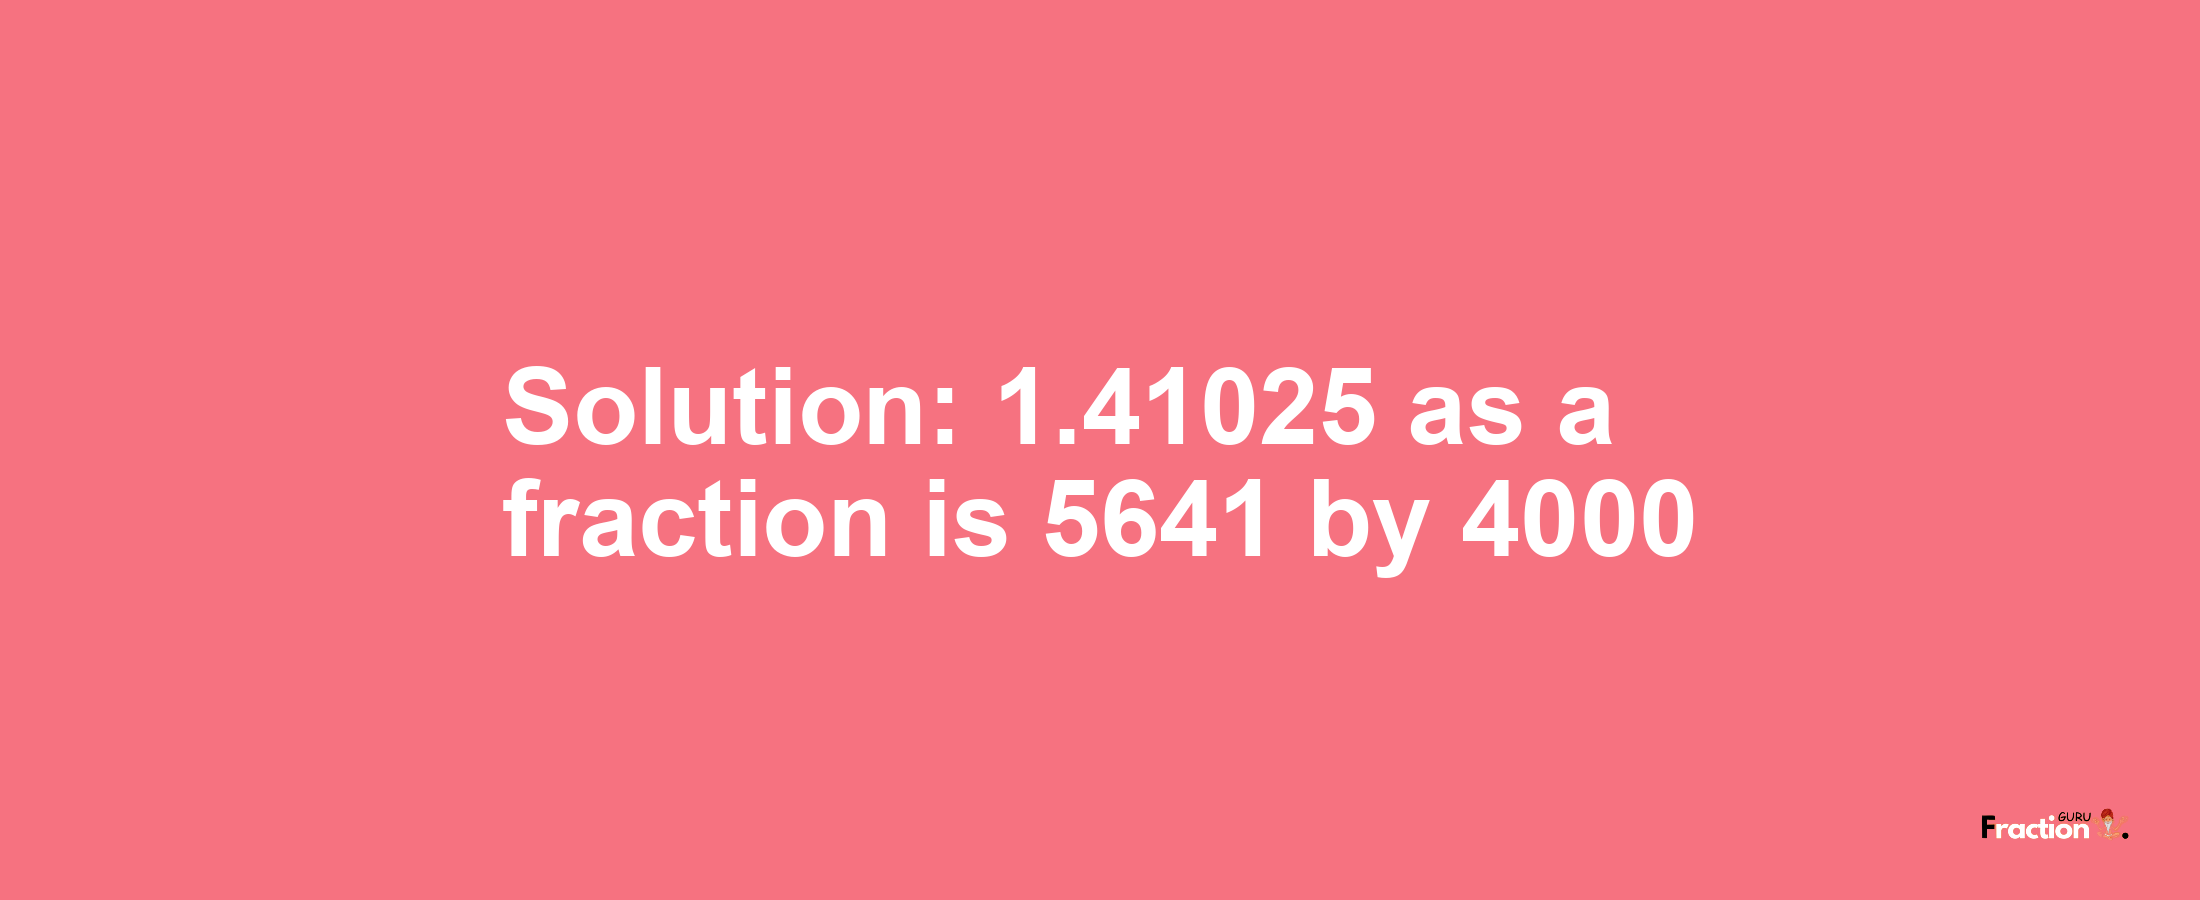 Solution:1.41025 as a fraction is 5641/4000